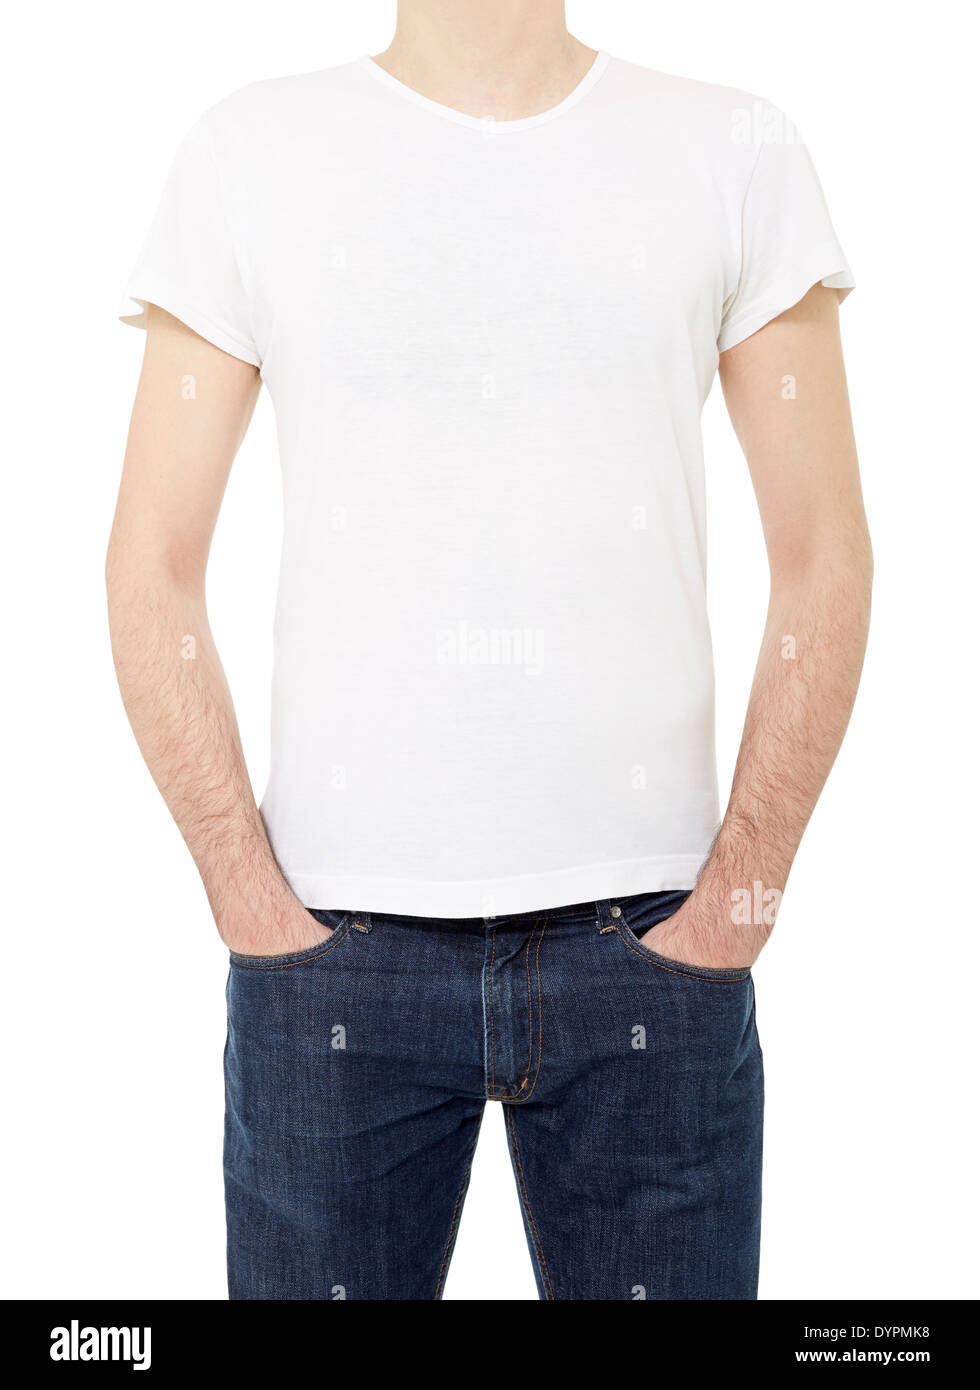 Man wearing white t-shirt with hands in pockets Stock Photo